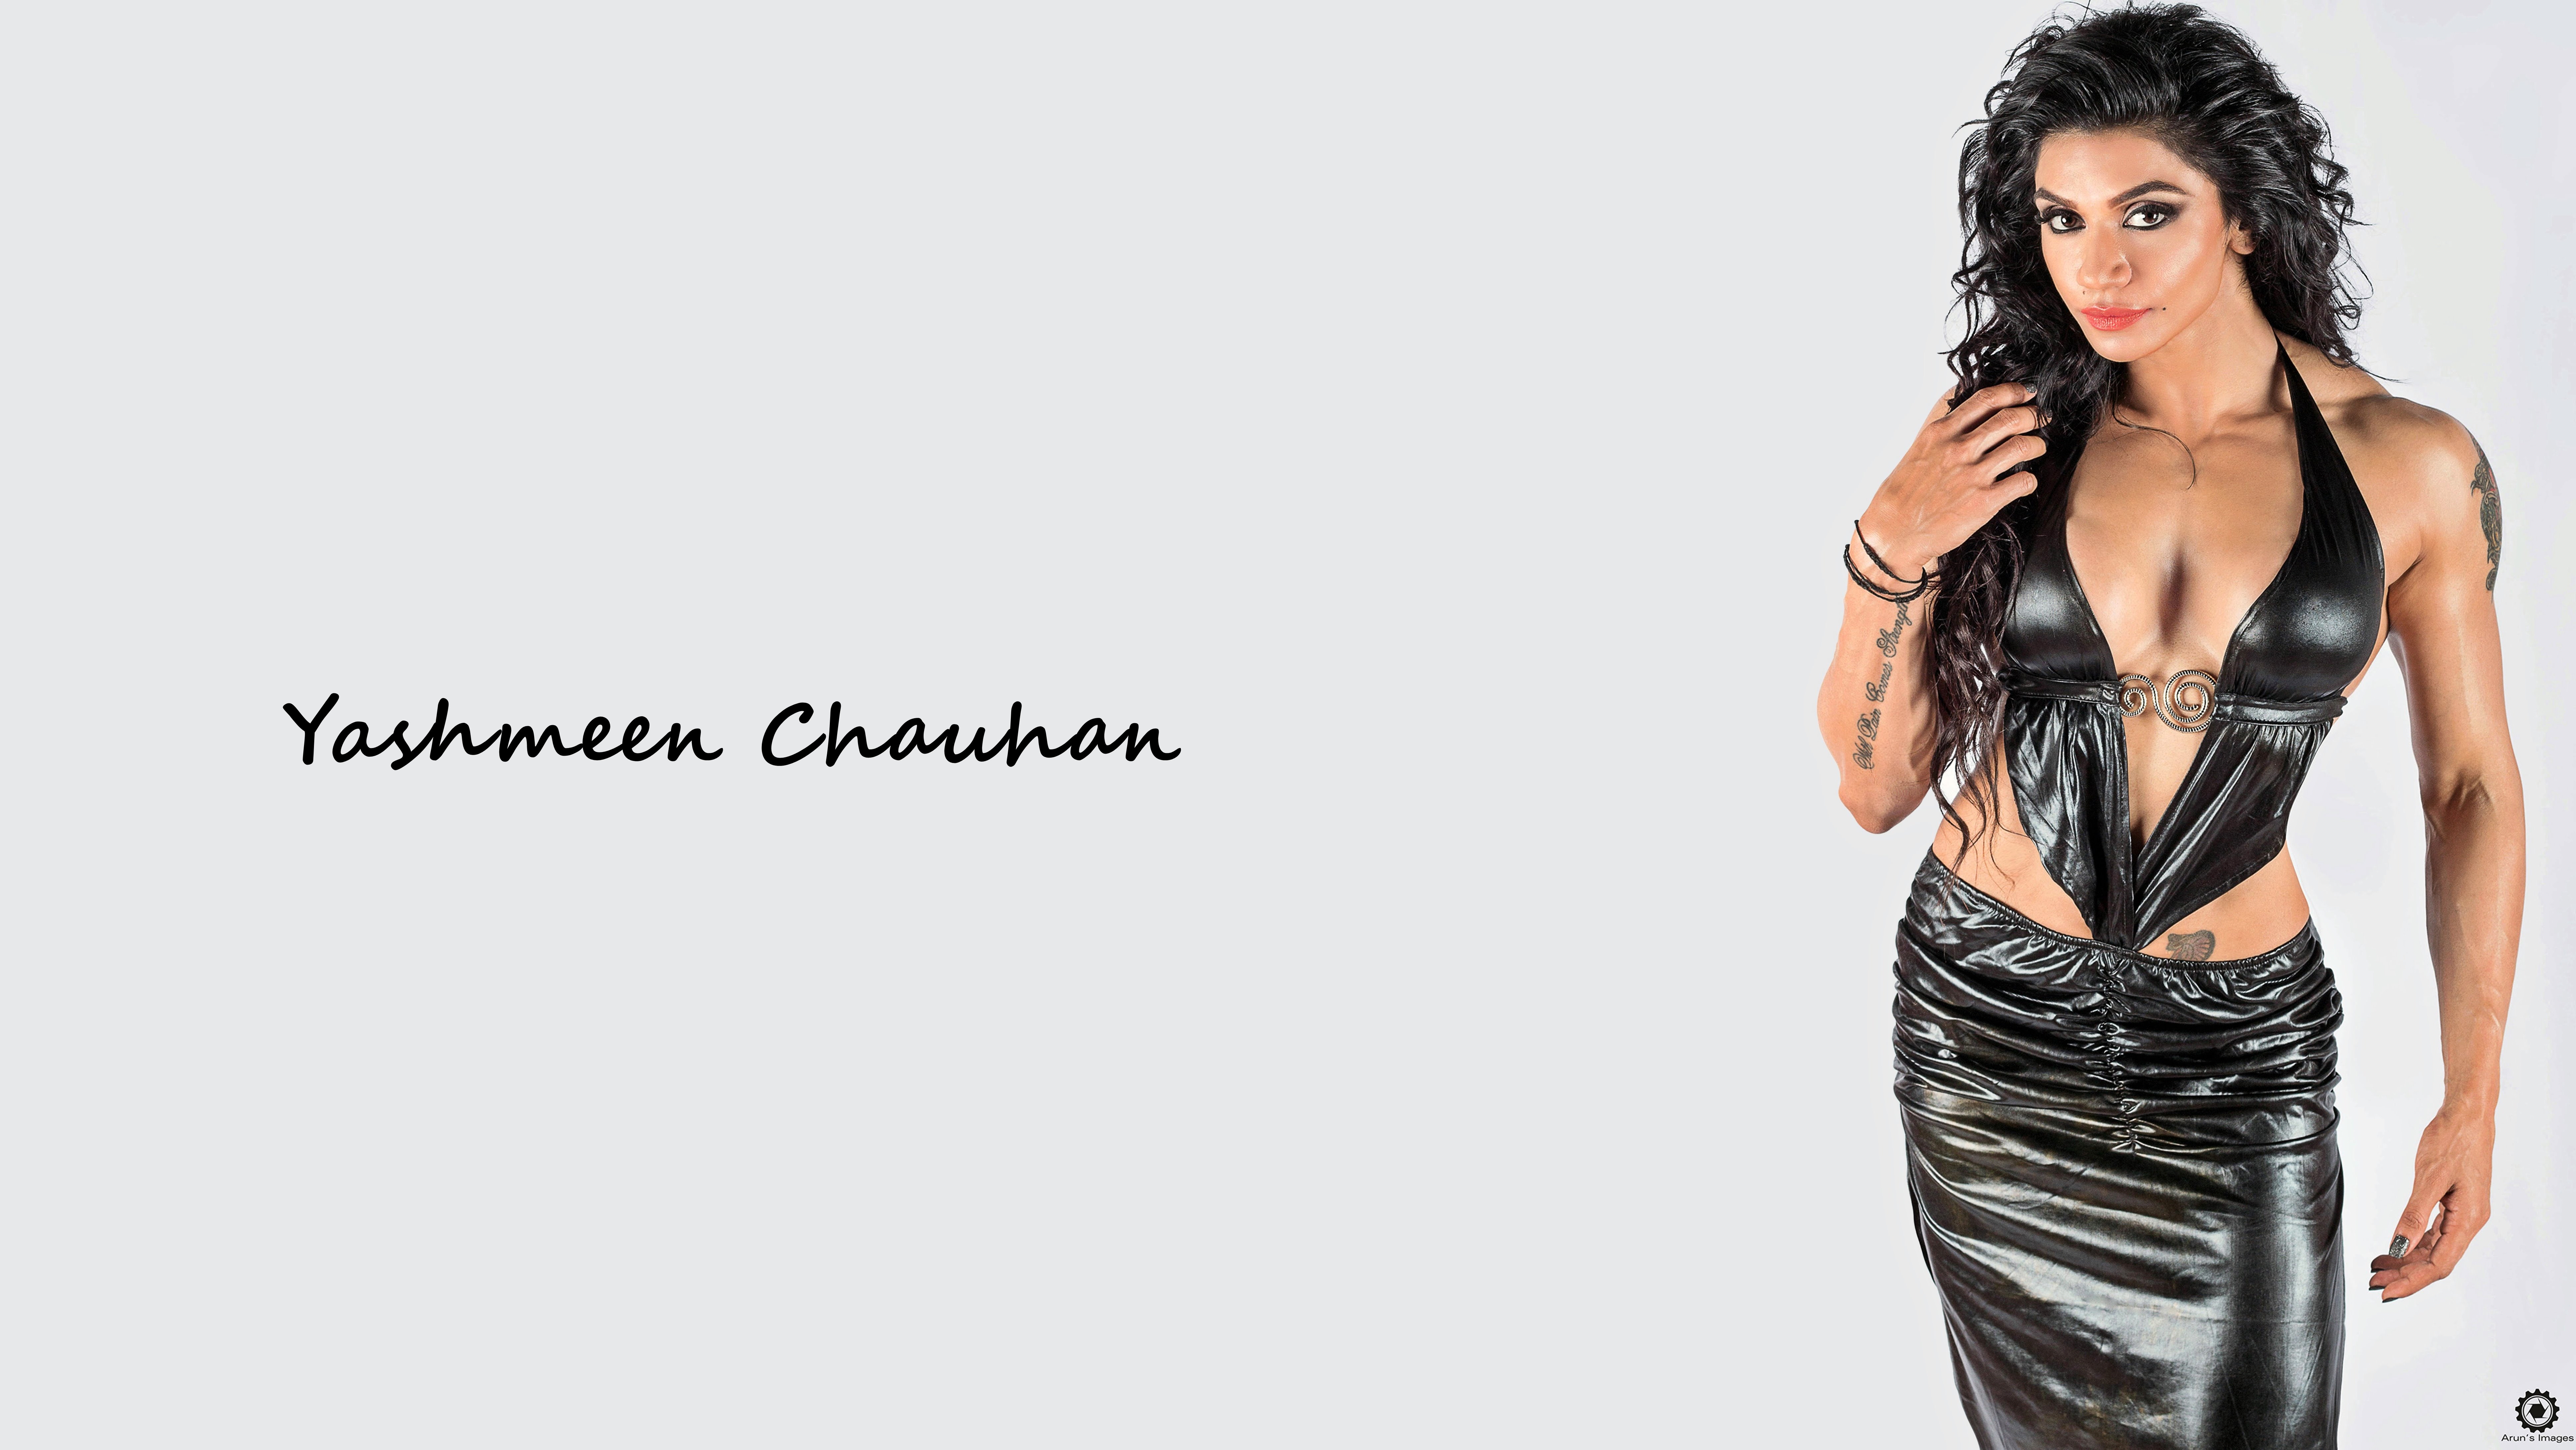 Wallpaper yashmeen chauhan, indian, curvy, fitness model, tight ...